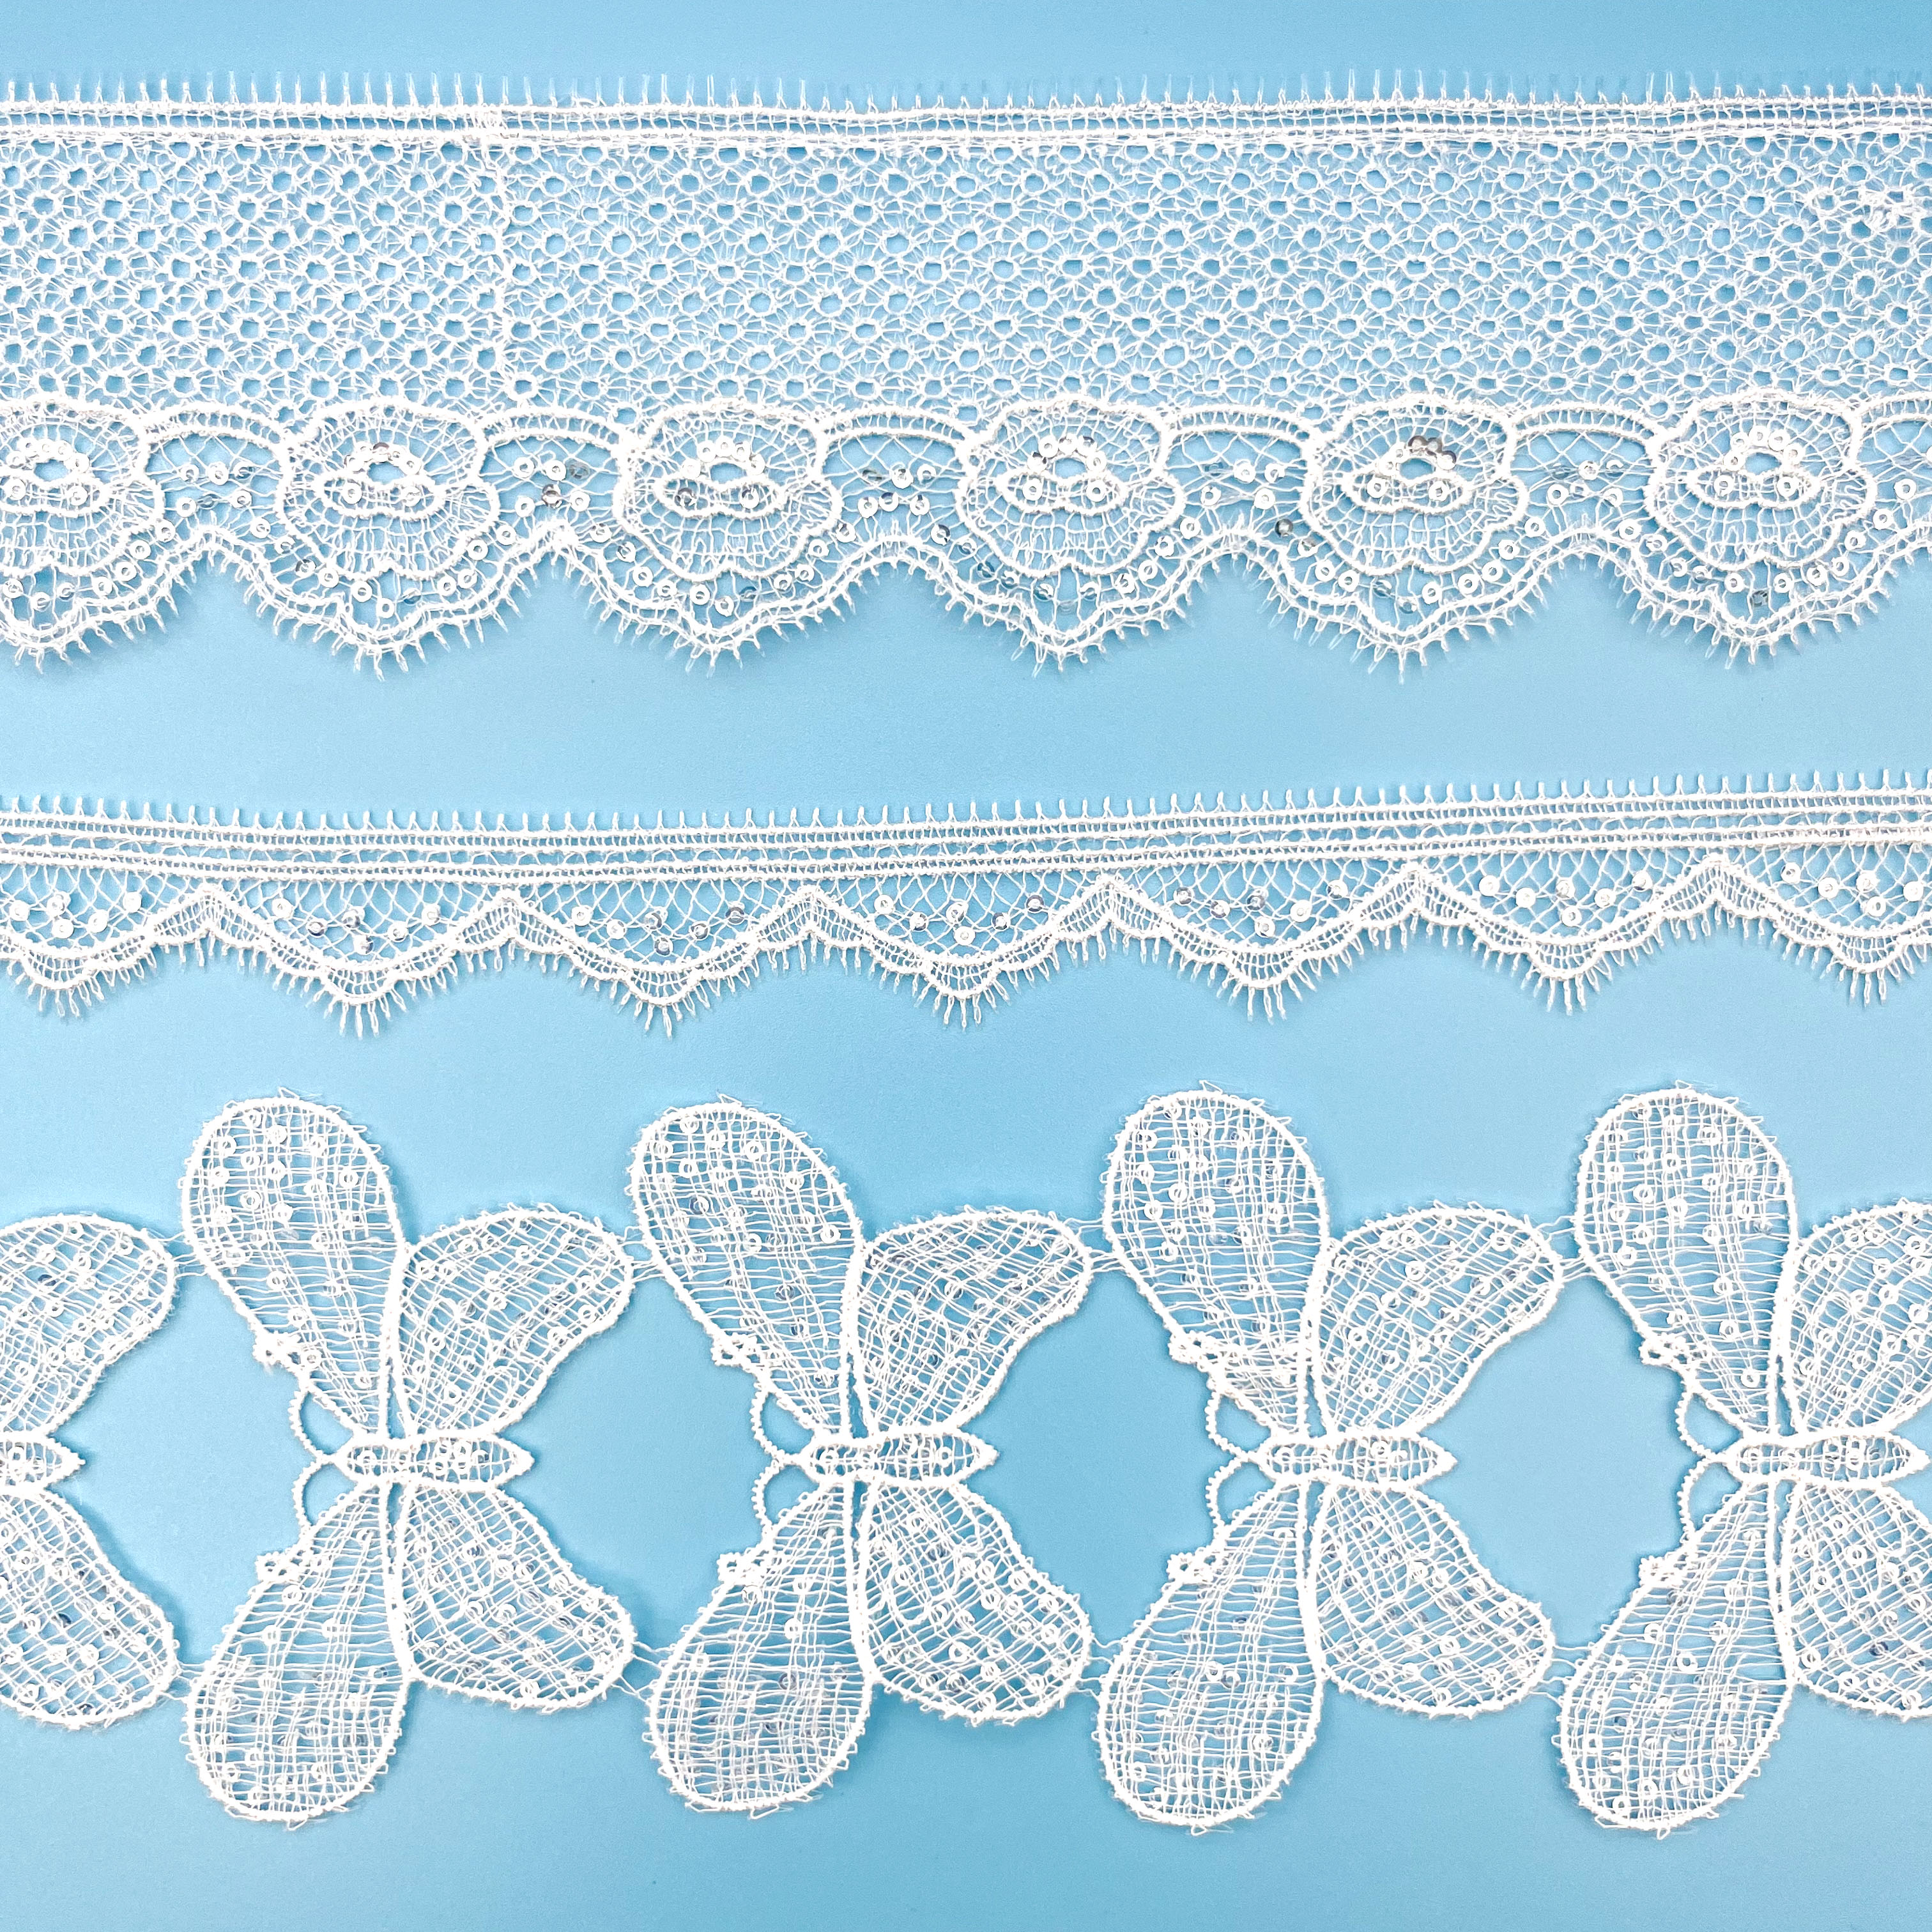 These lace ribbon trims come with clear pattern and soft touch,featured with holy,romantic and vintage sense.Each lace ribbon is rolled up, neat and organized,which is easy